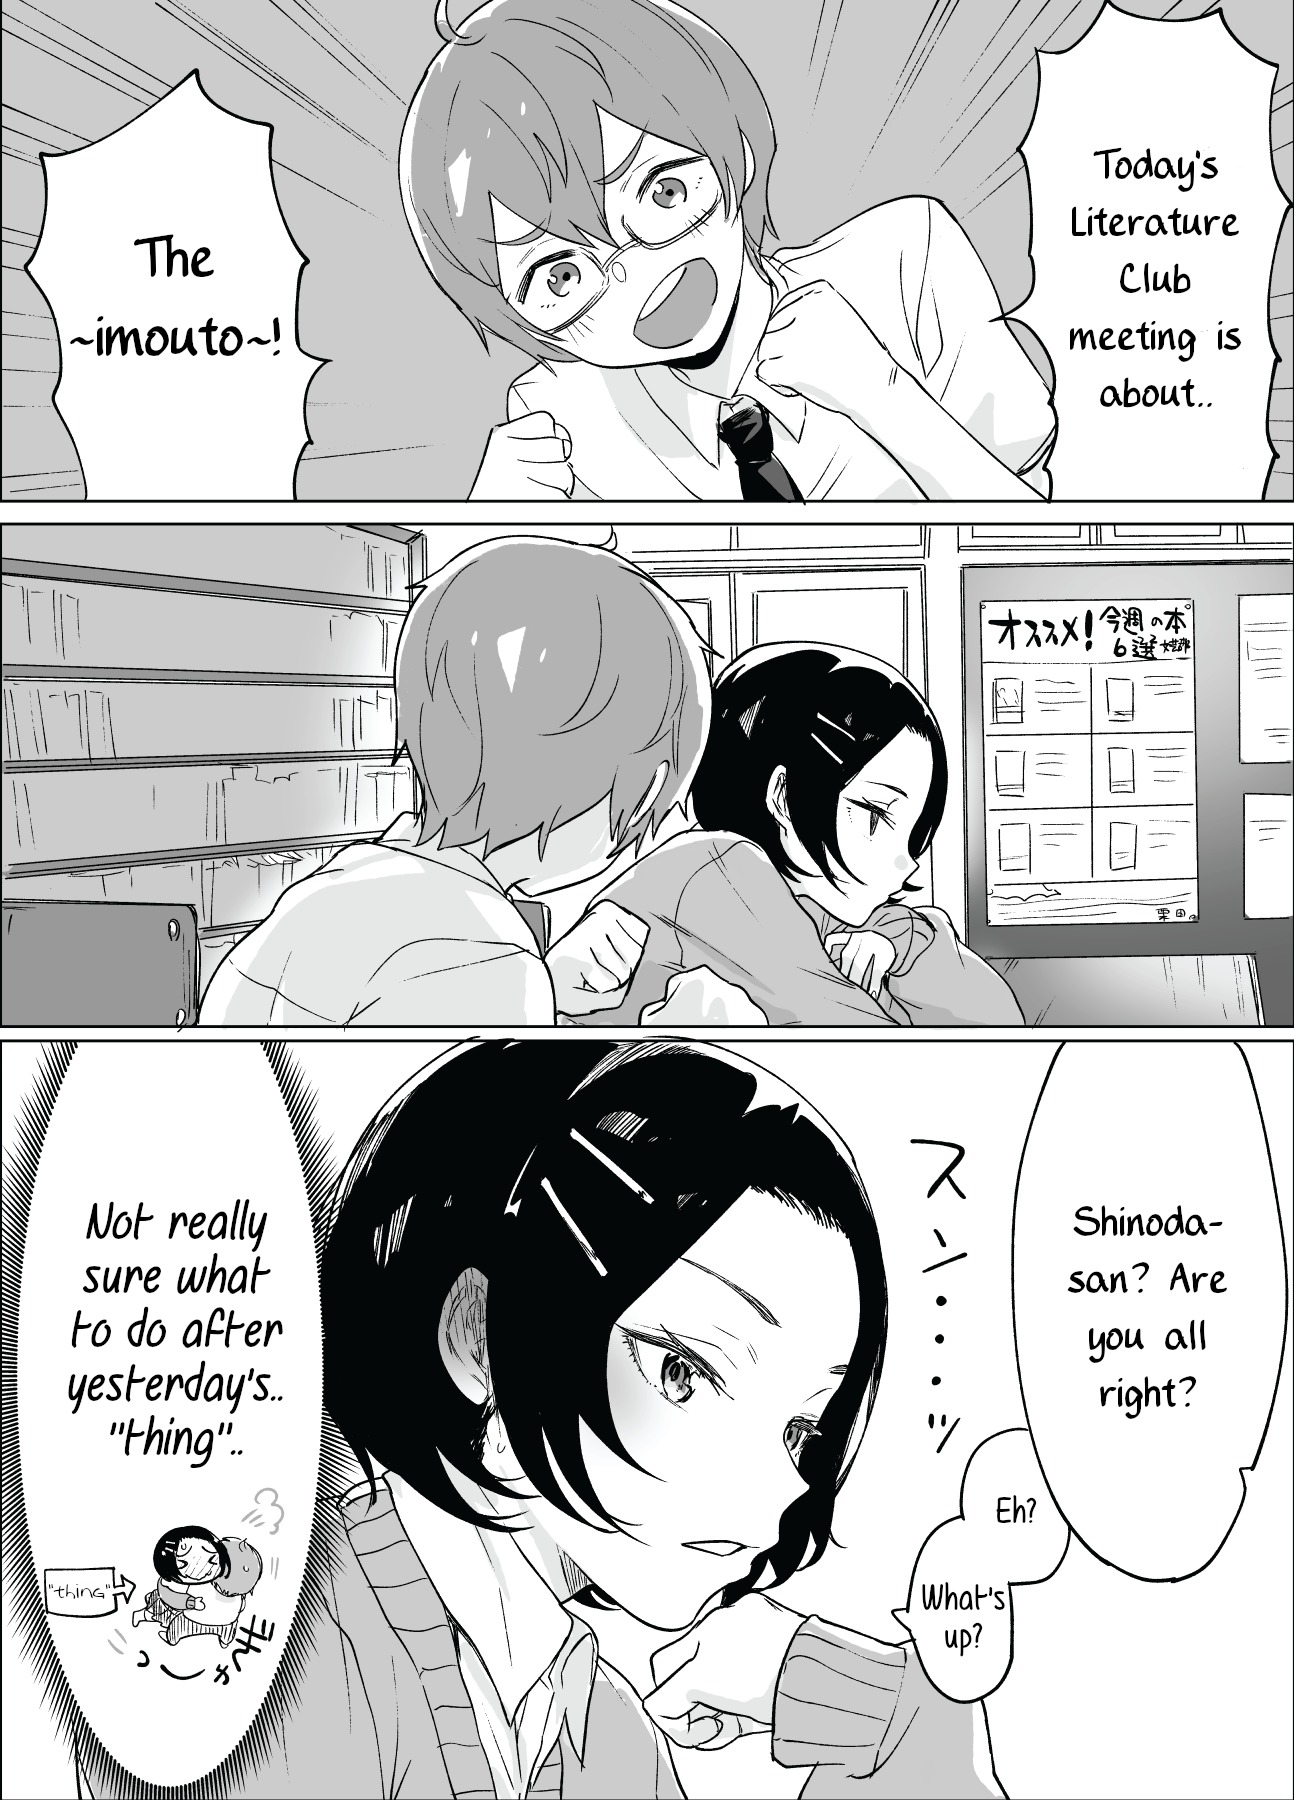 At first glance, Shinoda-san seems cool but is actually adorable! vol.1 ch.3